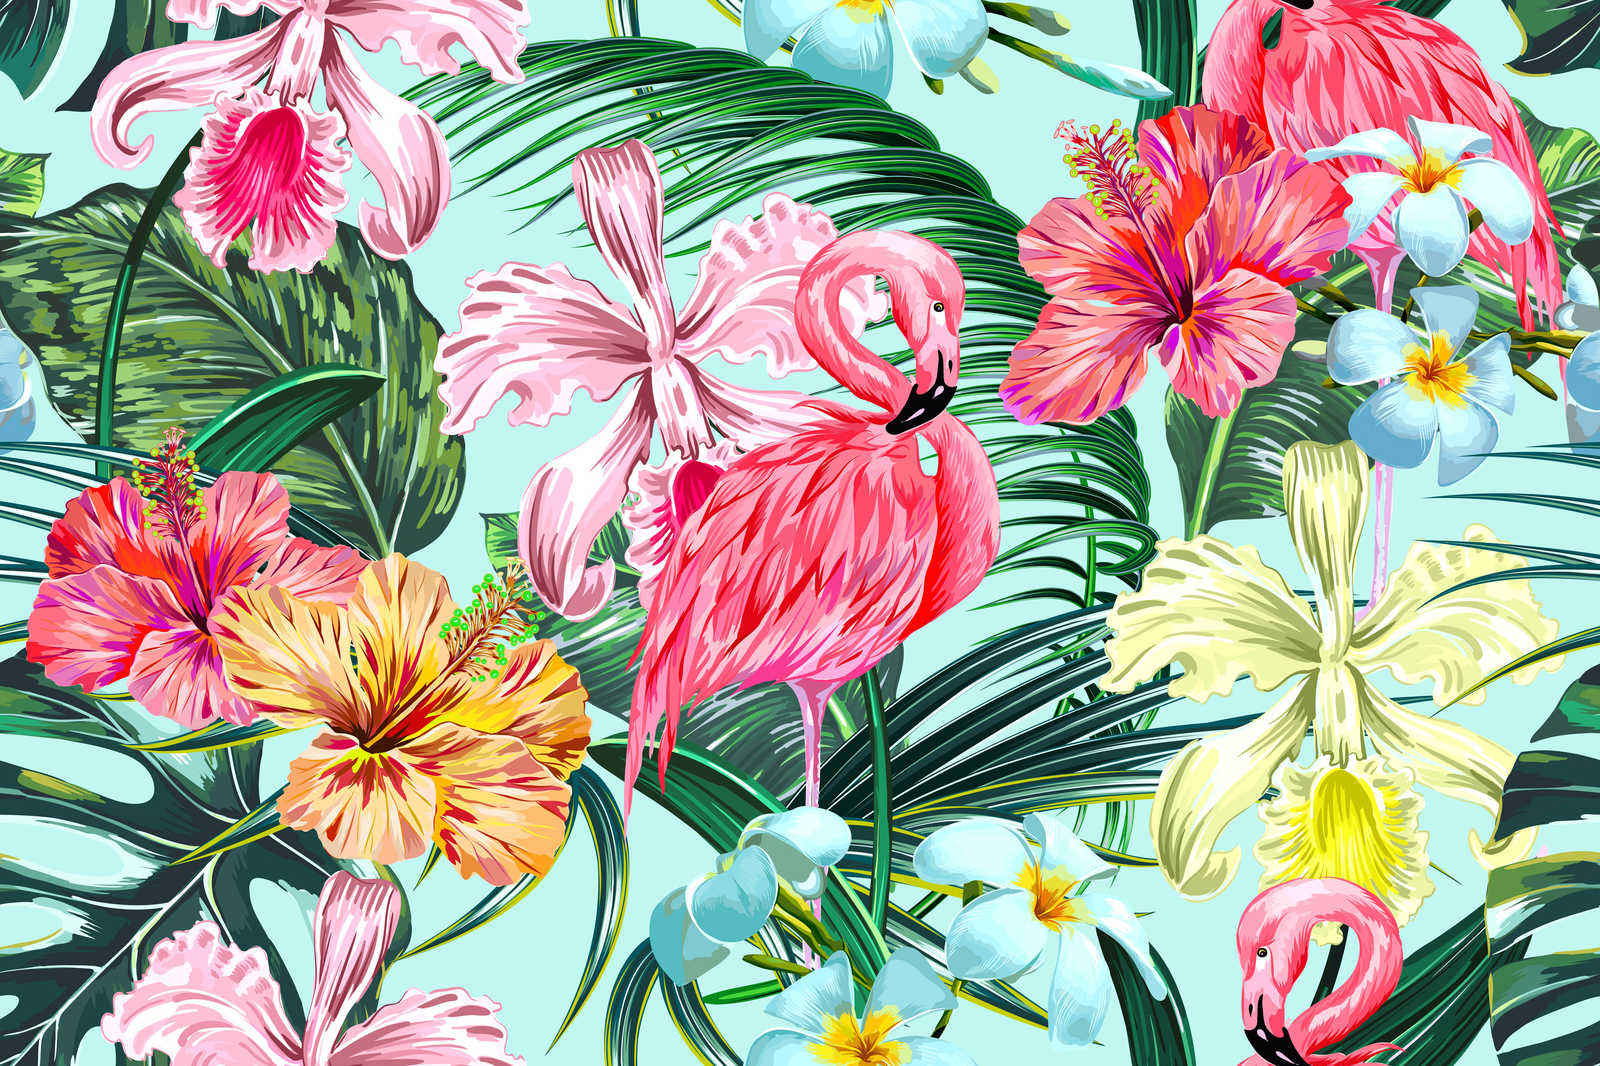             Tropical Canvas with Flamingo - 0.90 m x 0.60 m
        